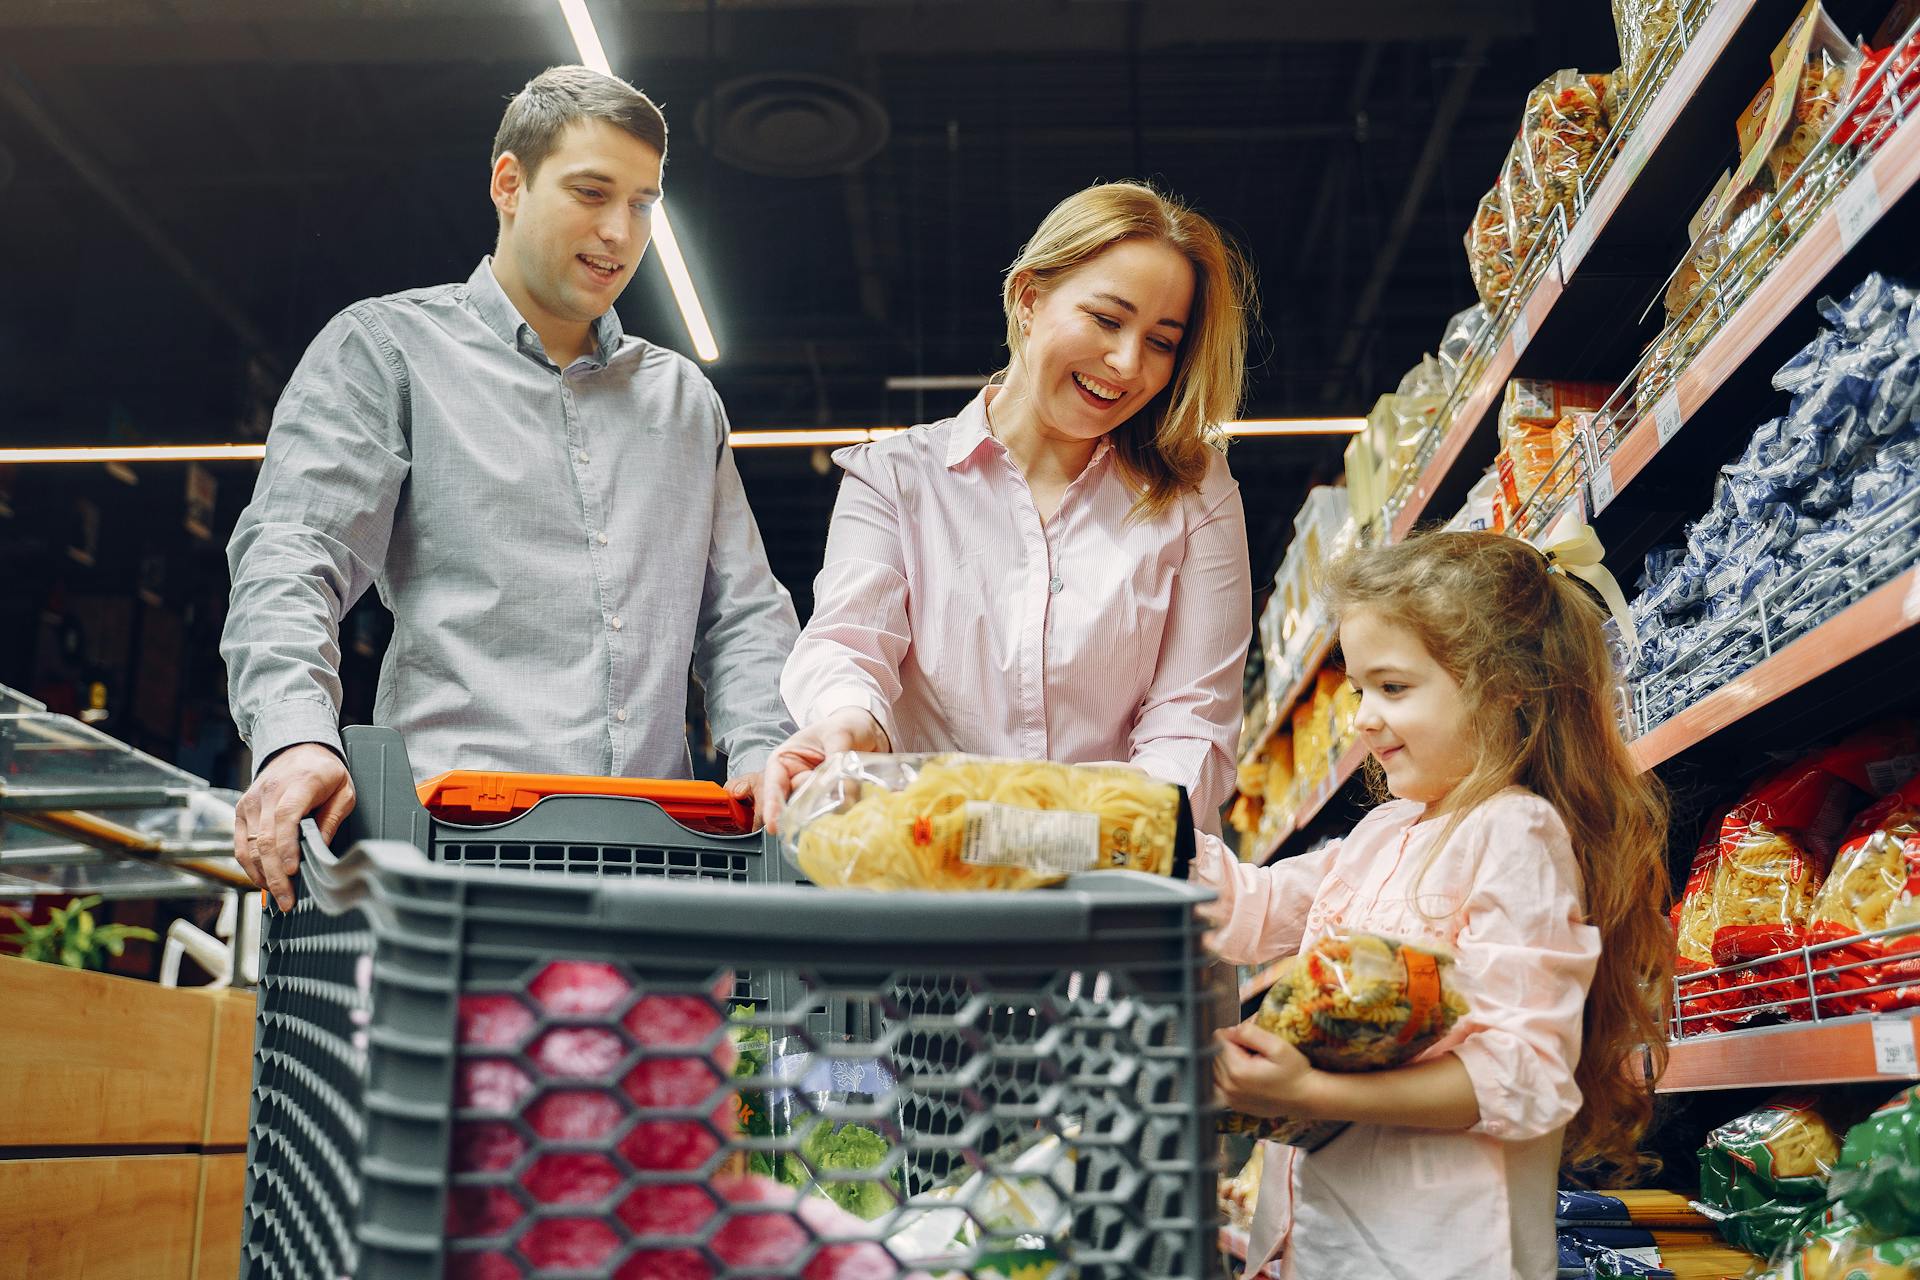 A family doing grocery shopping | Source: Pexels